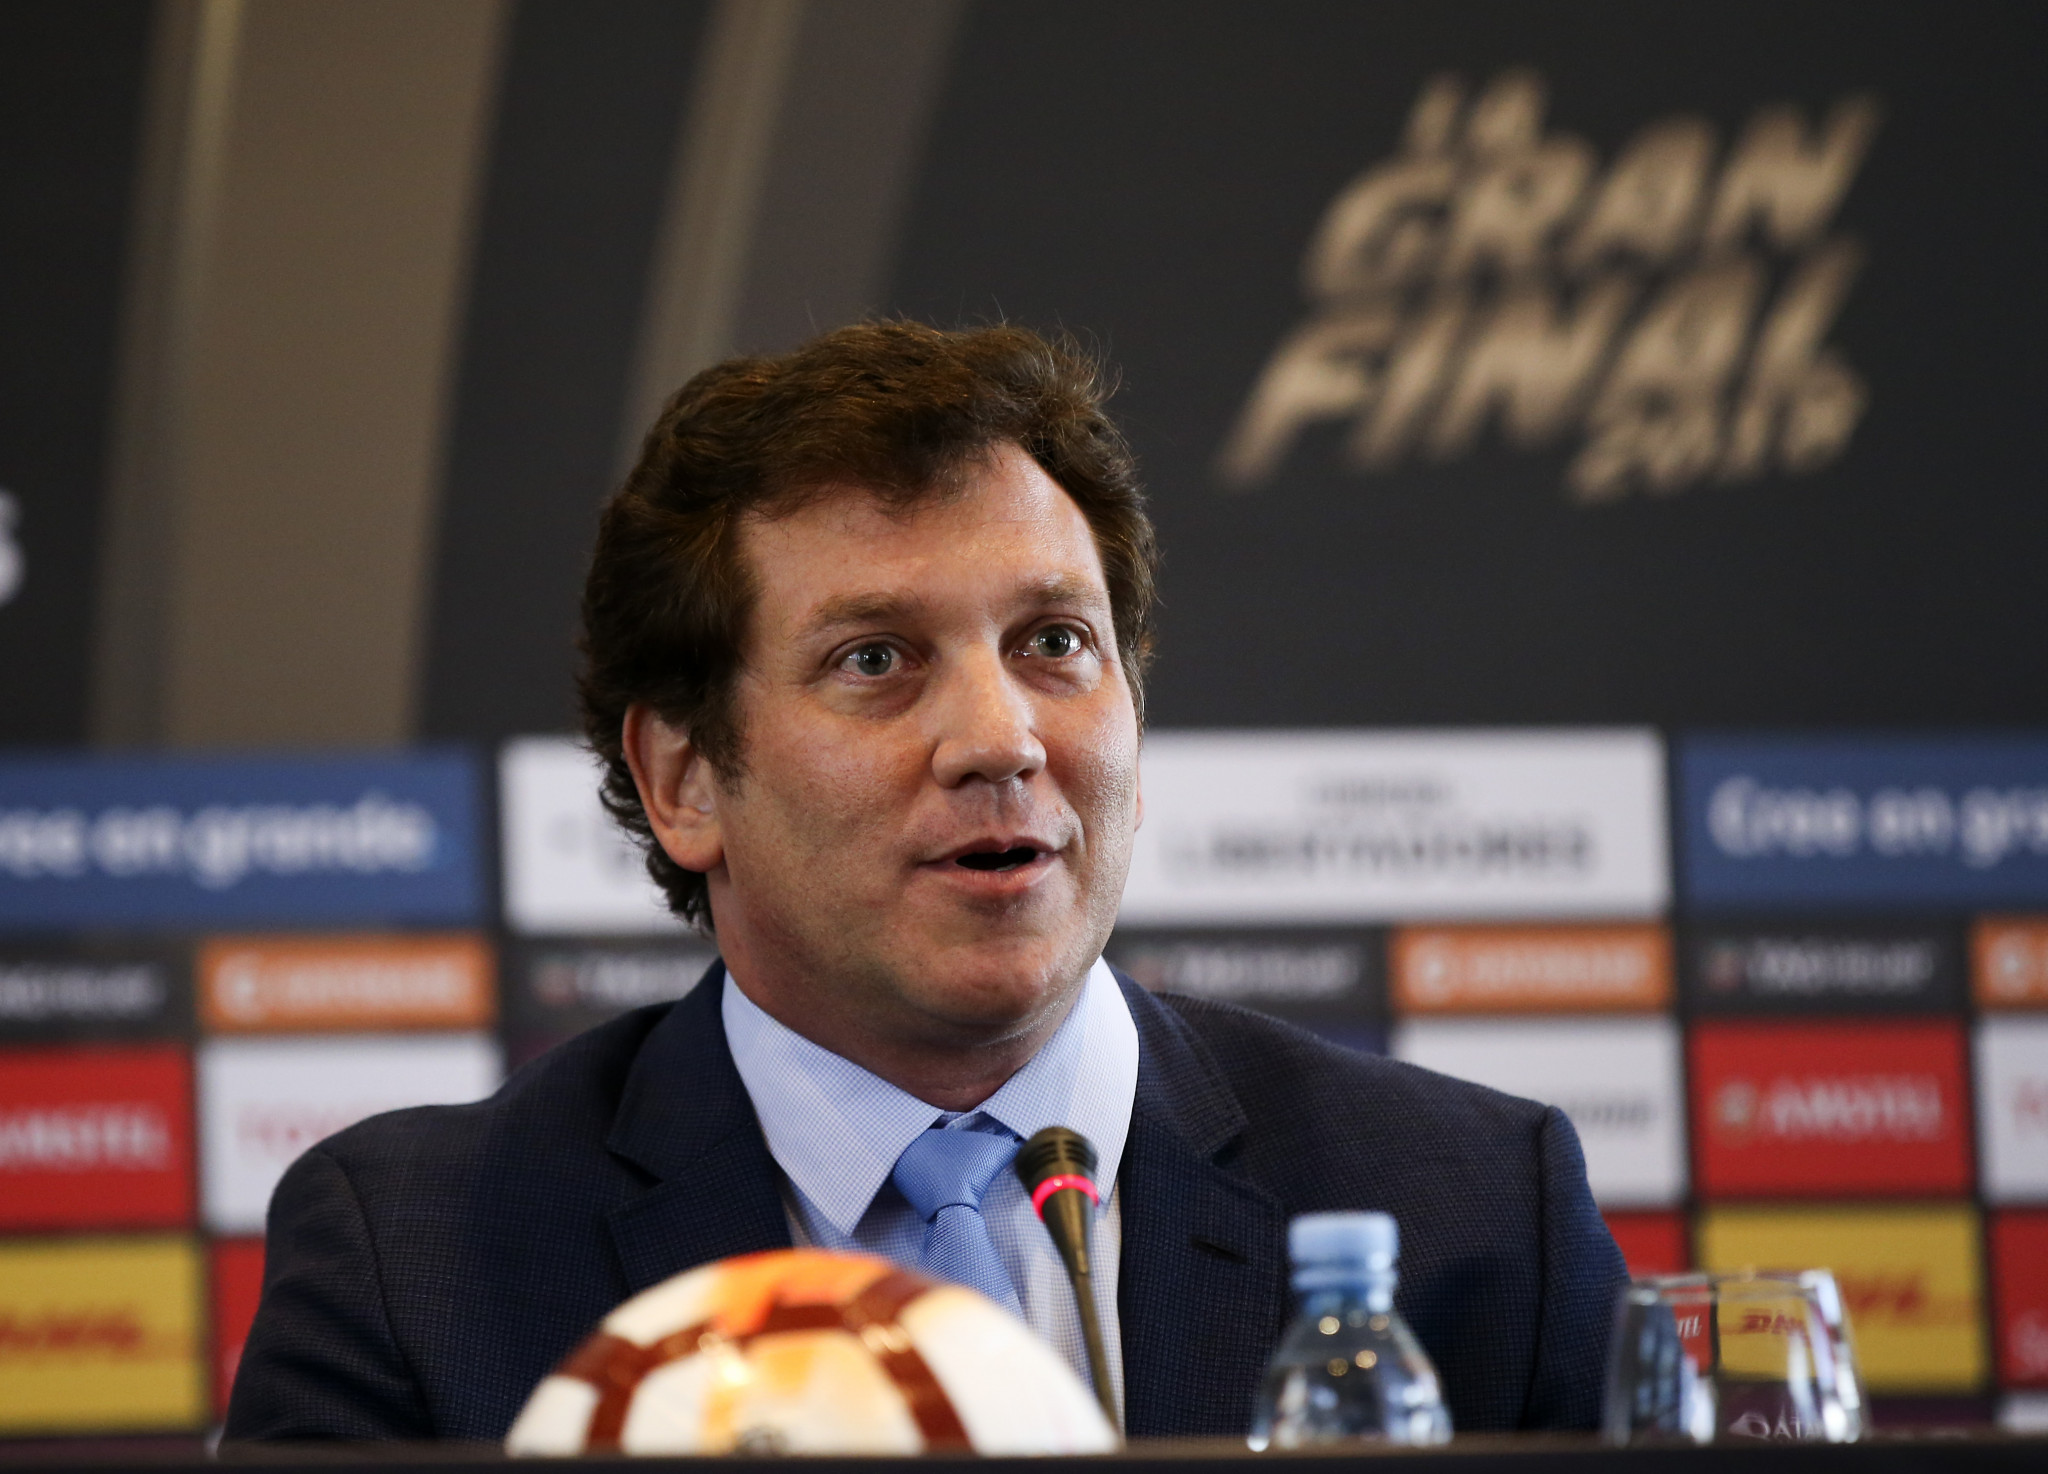 Alejandro Dominguez has claimed FIFA should hold the World Cup every two years ©Getty Images